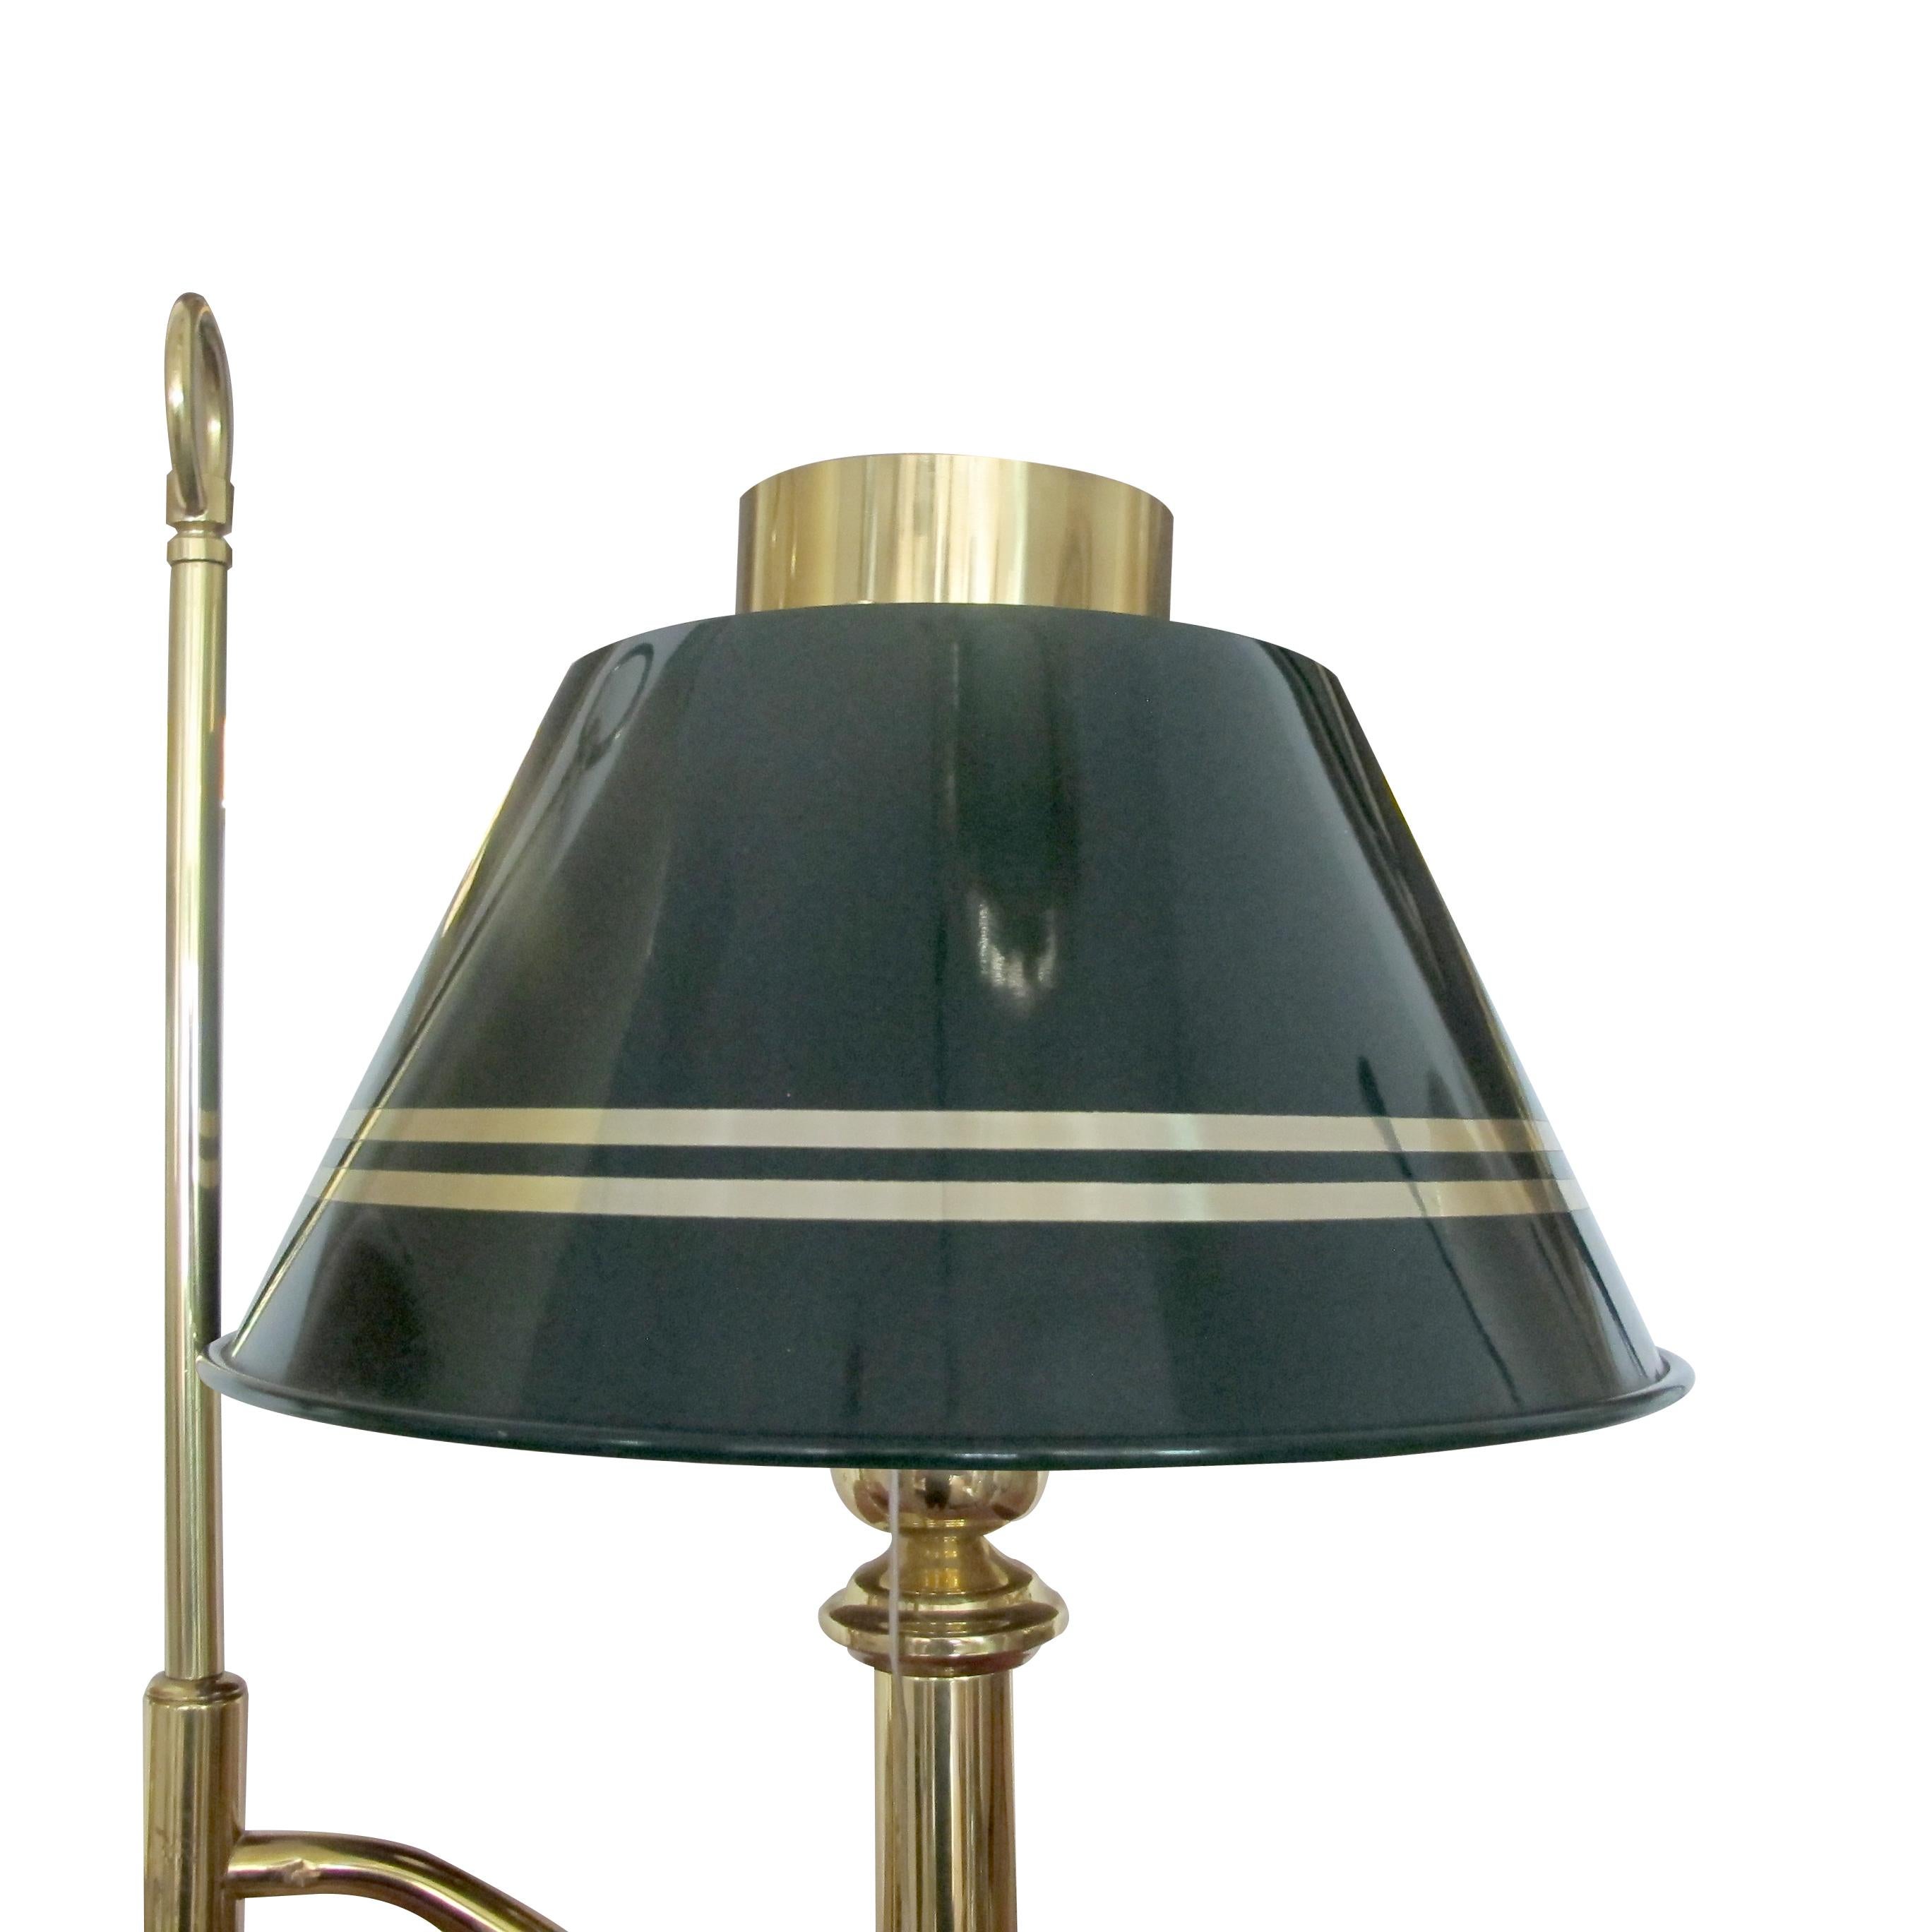 1970s Large Brass Desk Table Lamp with Green Metal Shade, Swedish In Good Condition For Sale In London, GB